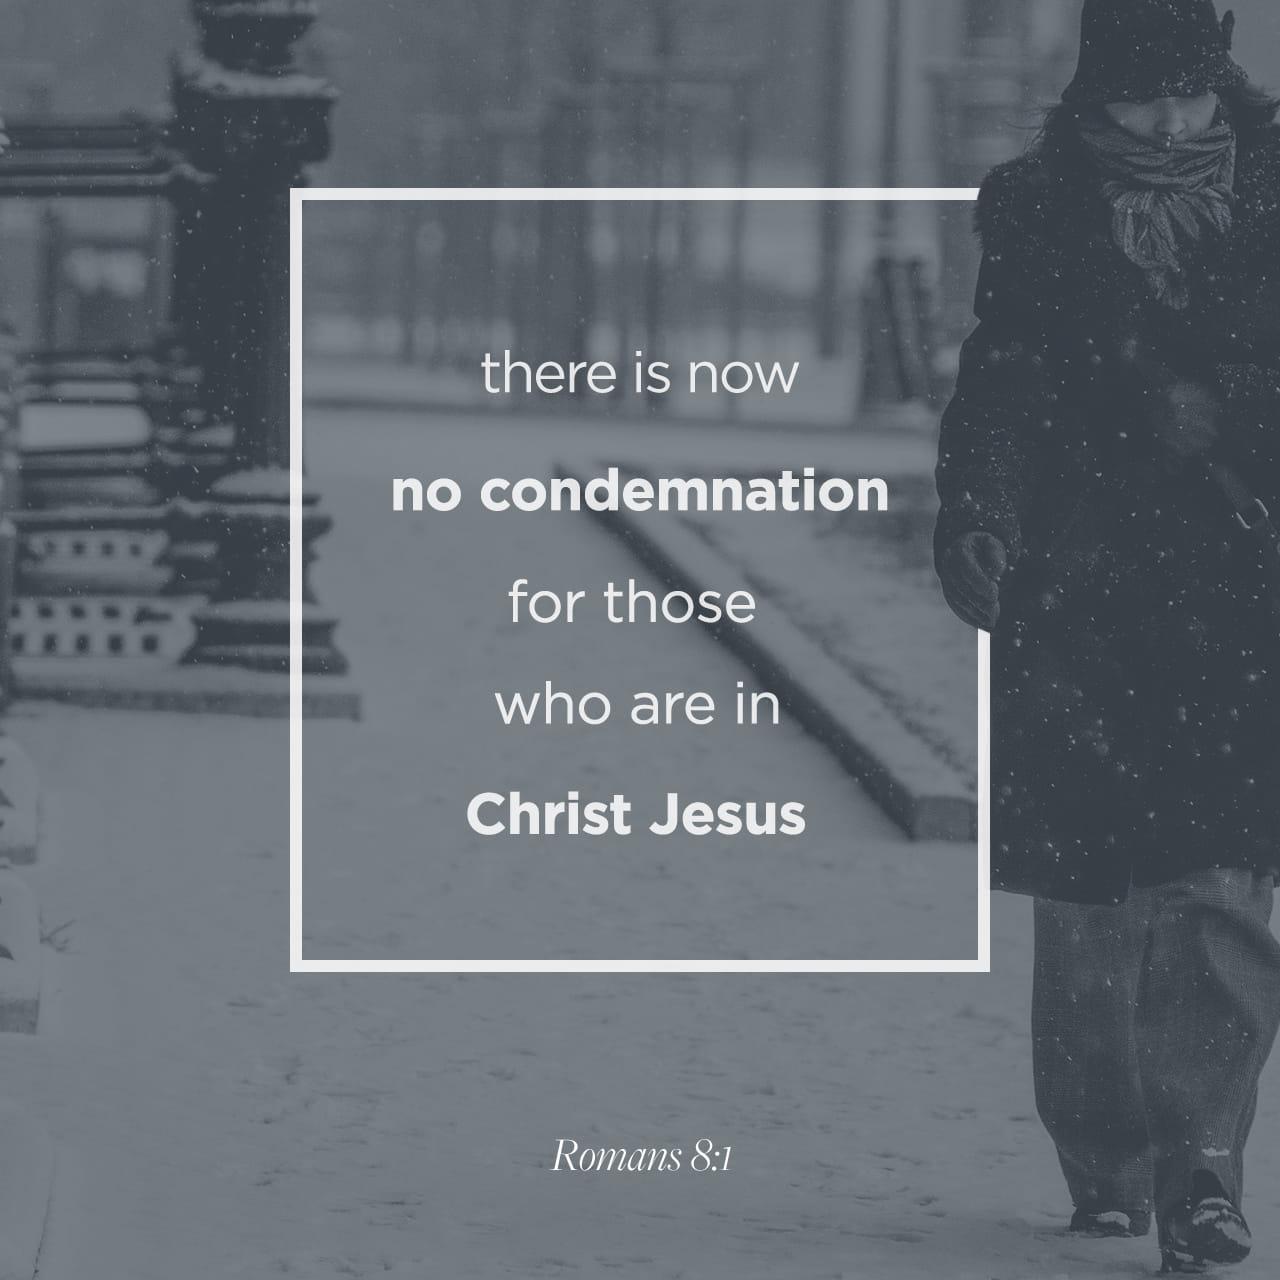 Bible Verse of the Day - day 149 - image 525 (Romans 8:1)